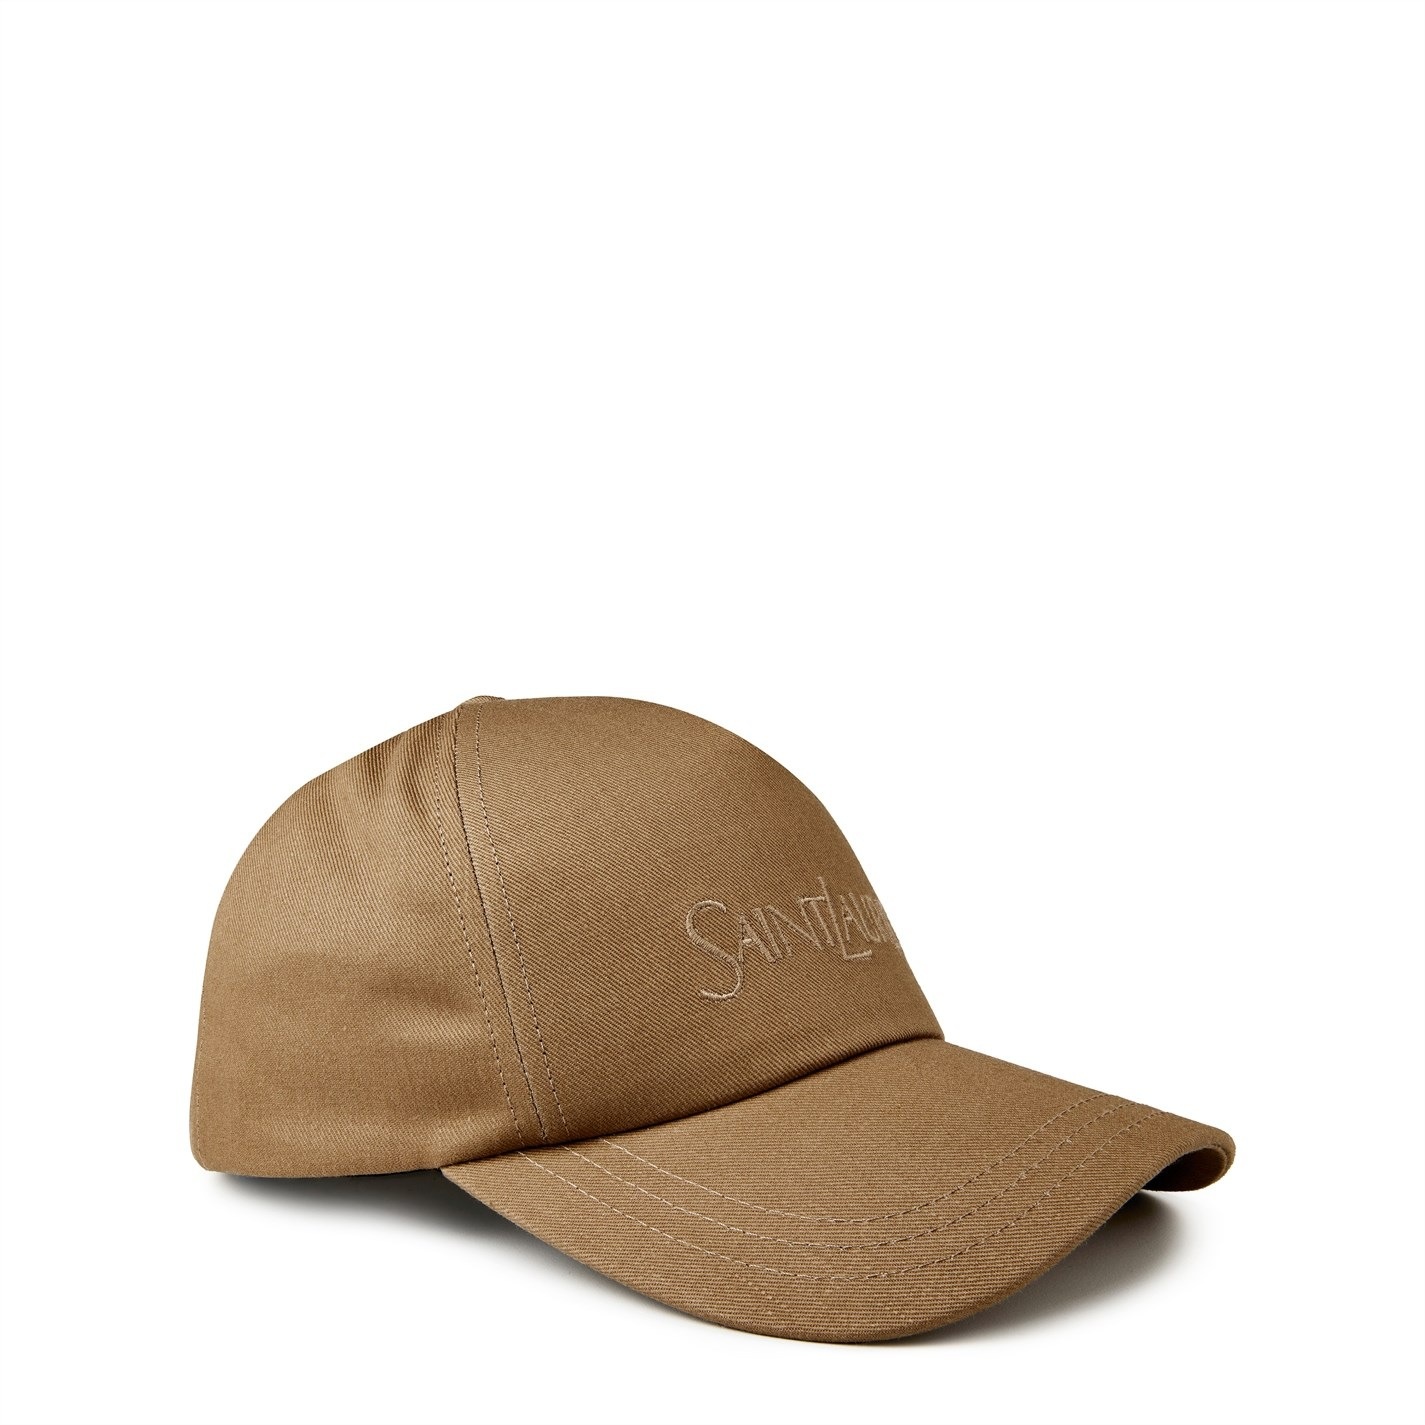 LOGO EMBROIDERED CAP - 4